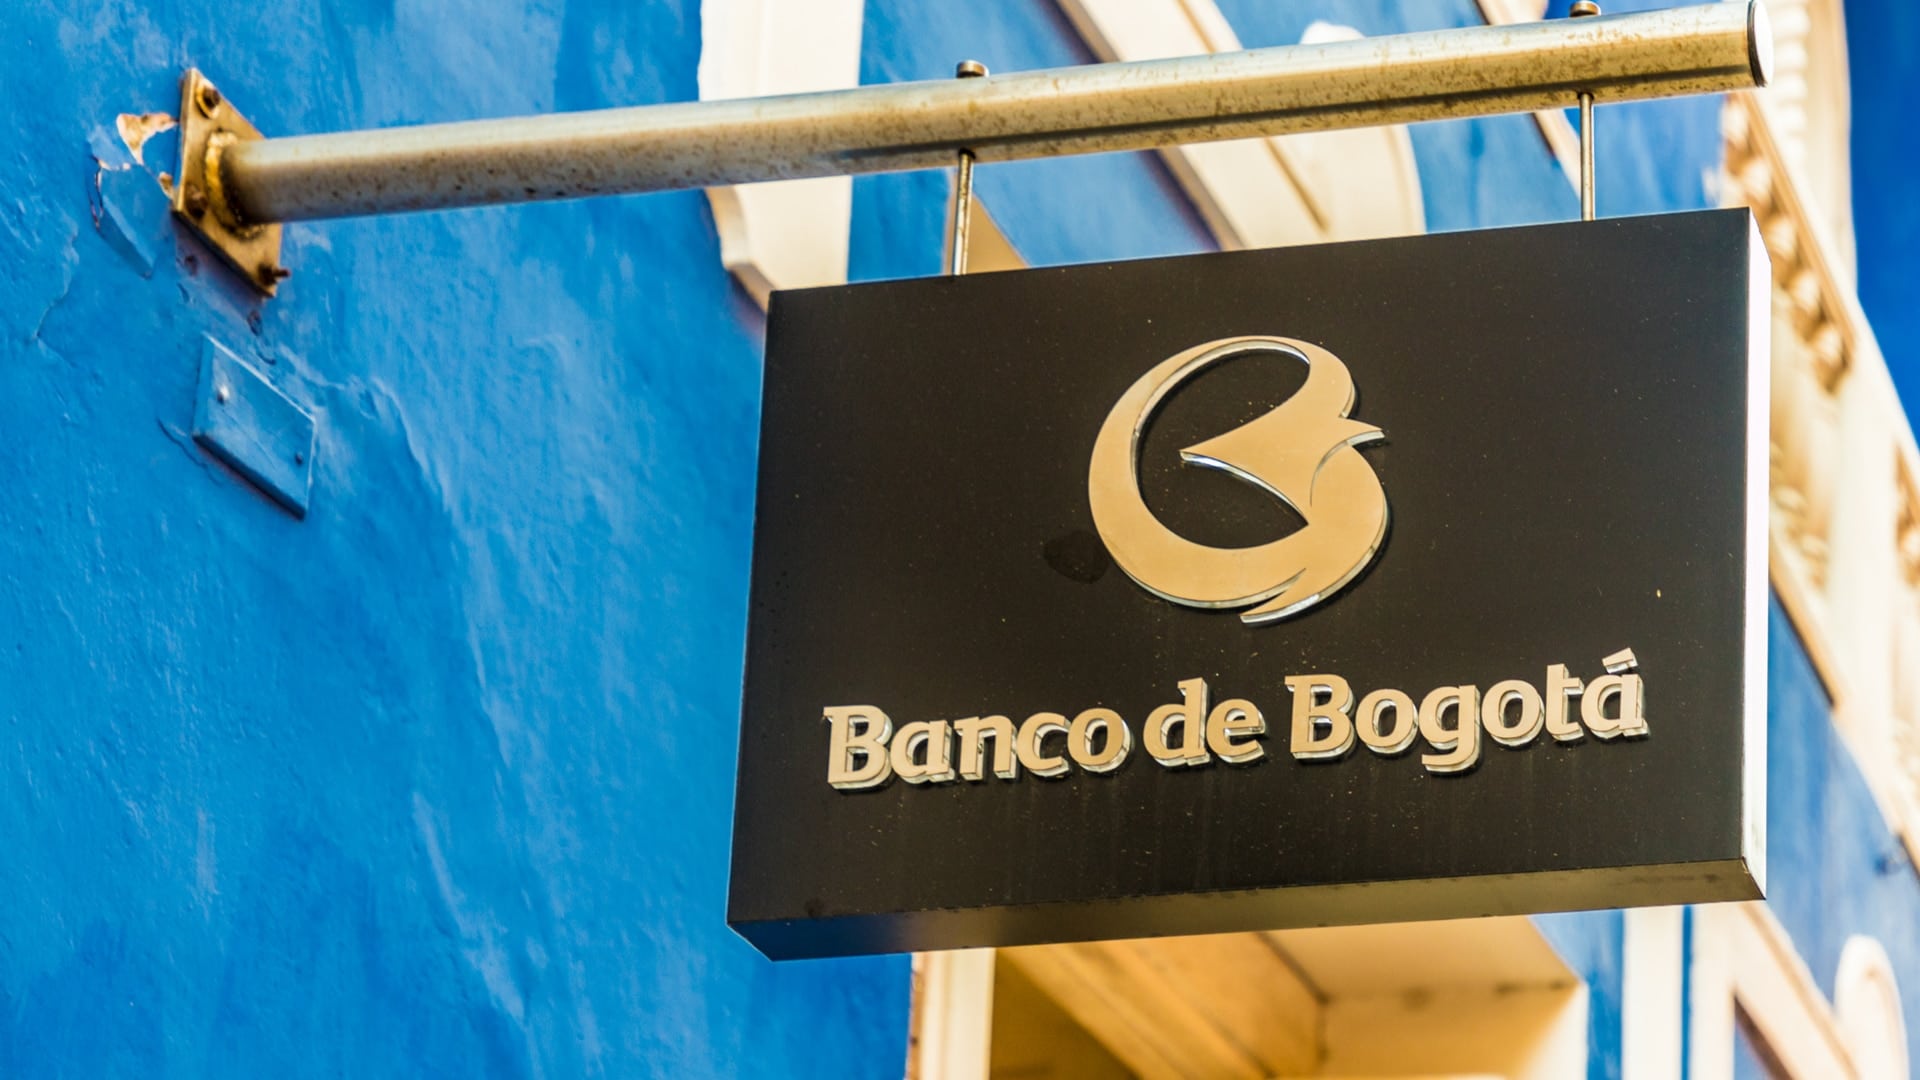 Colombia's oldest bank starts testing cryptocurrency purchases